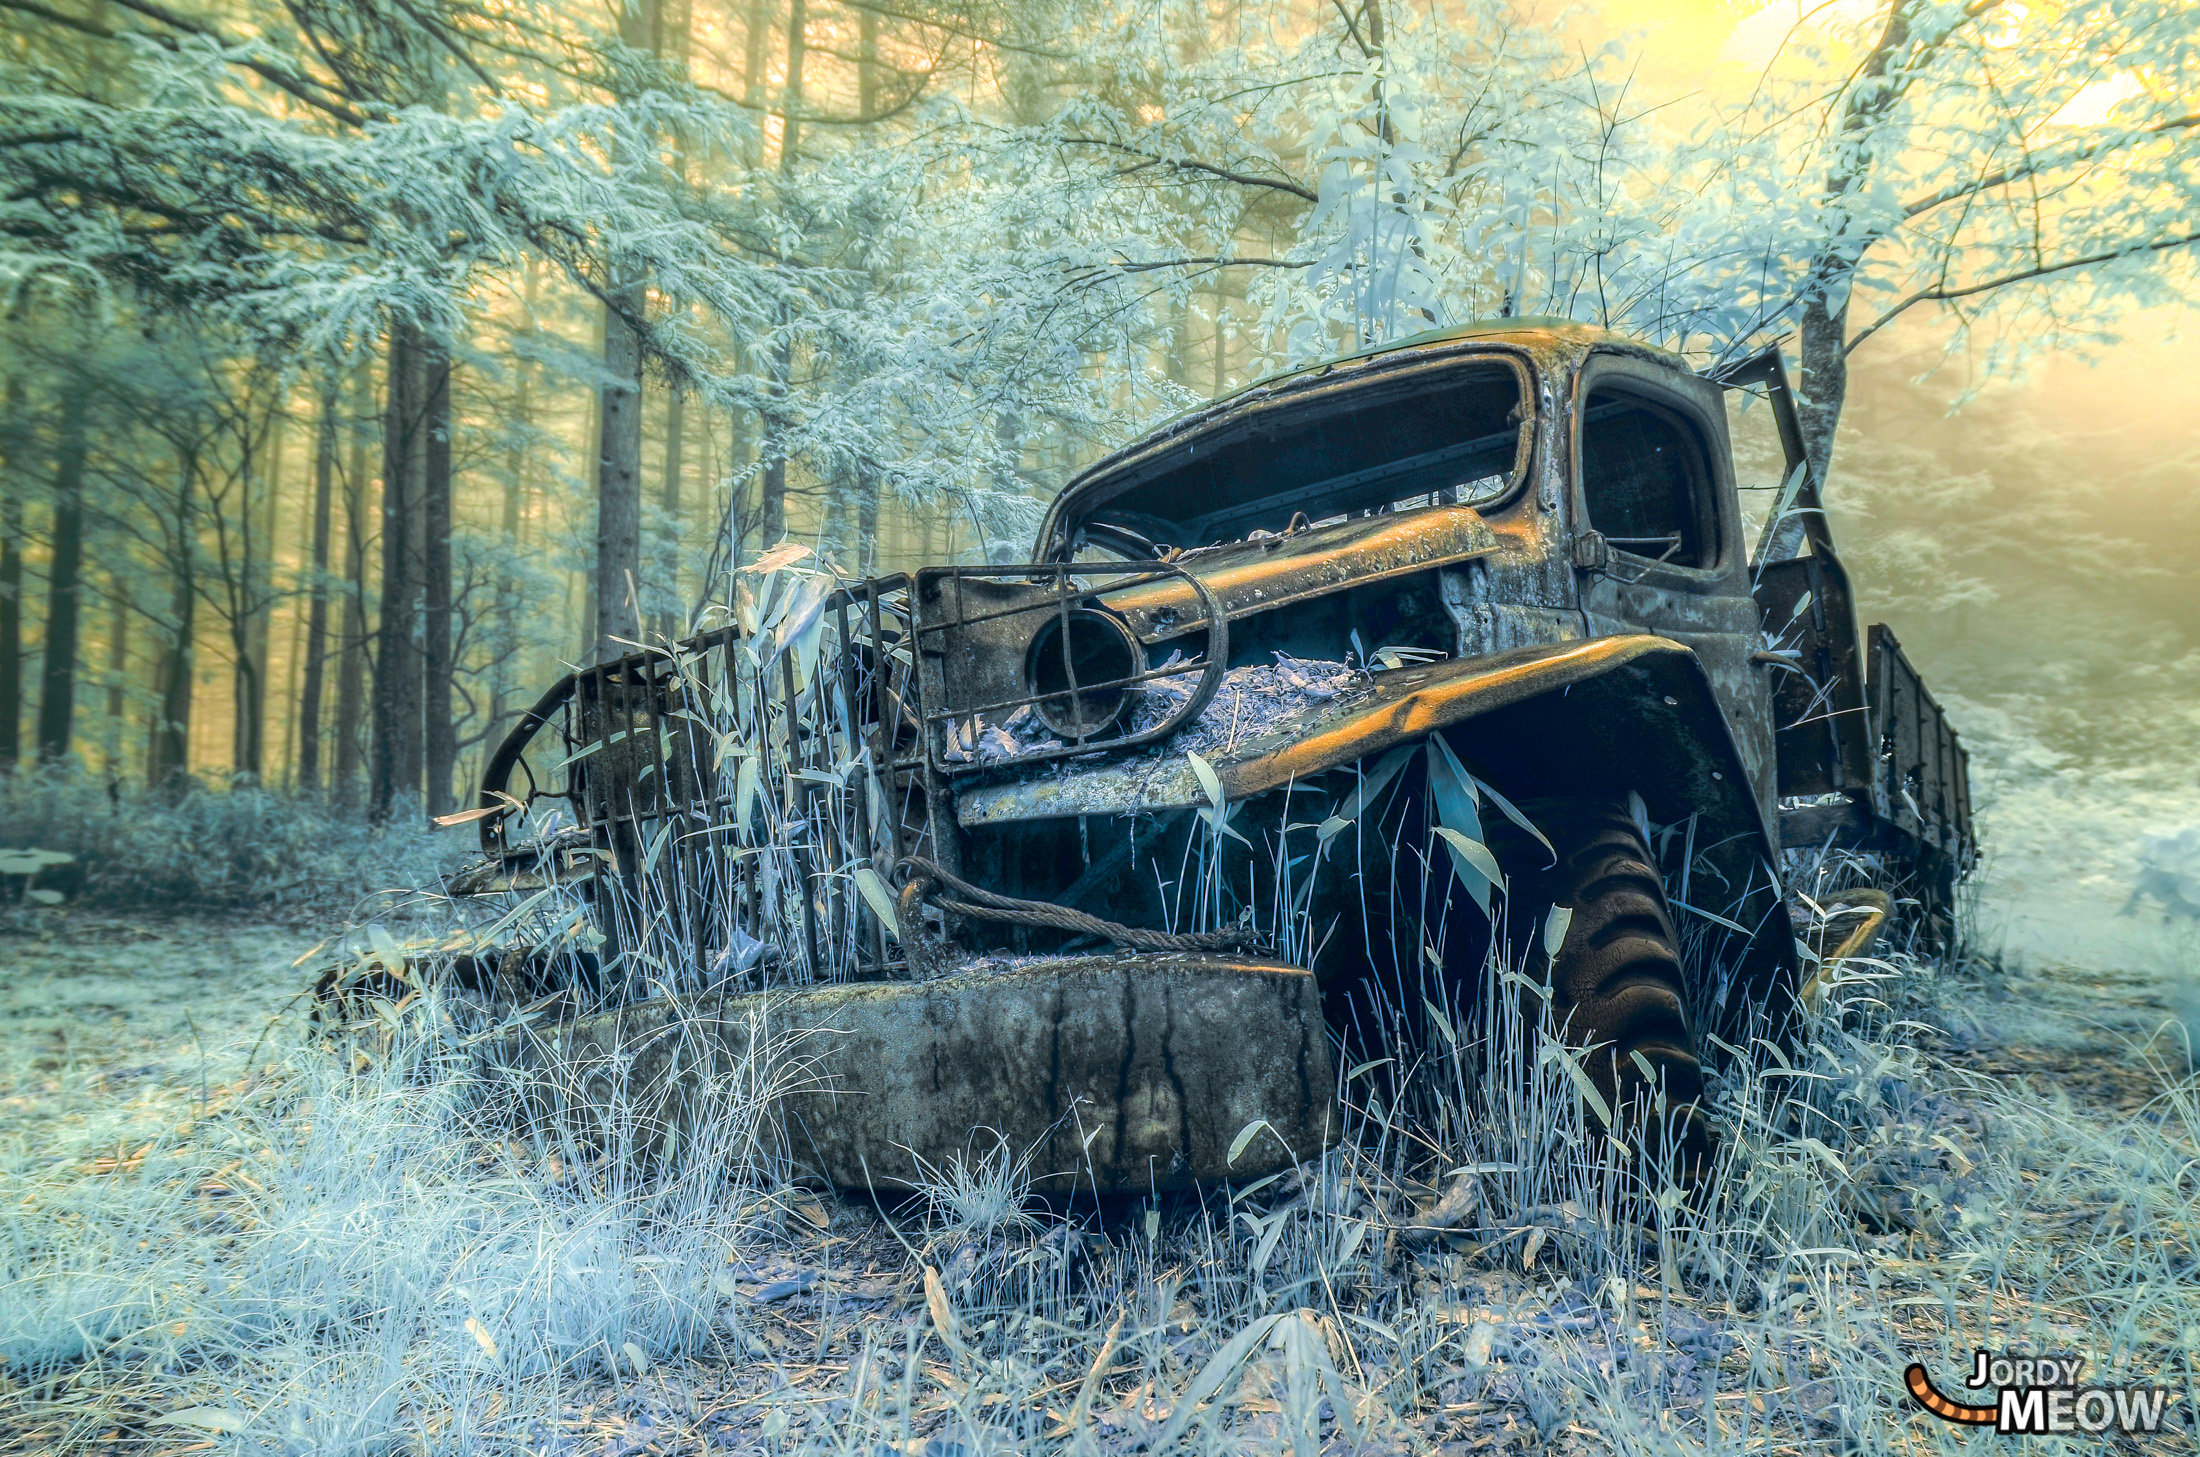 Abandoned Dodge car in mystical forest, frozen in time, nature reclaiming its space.